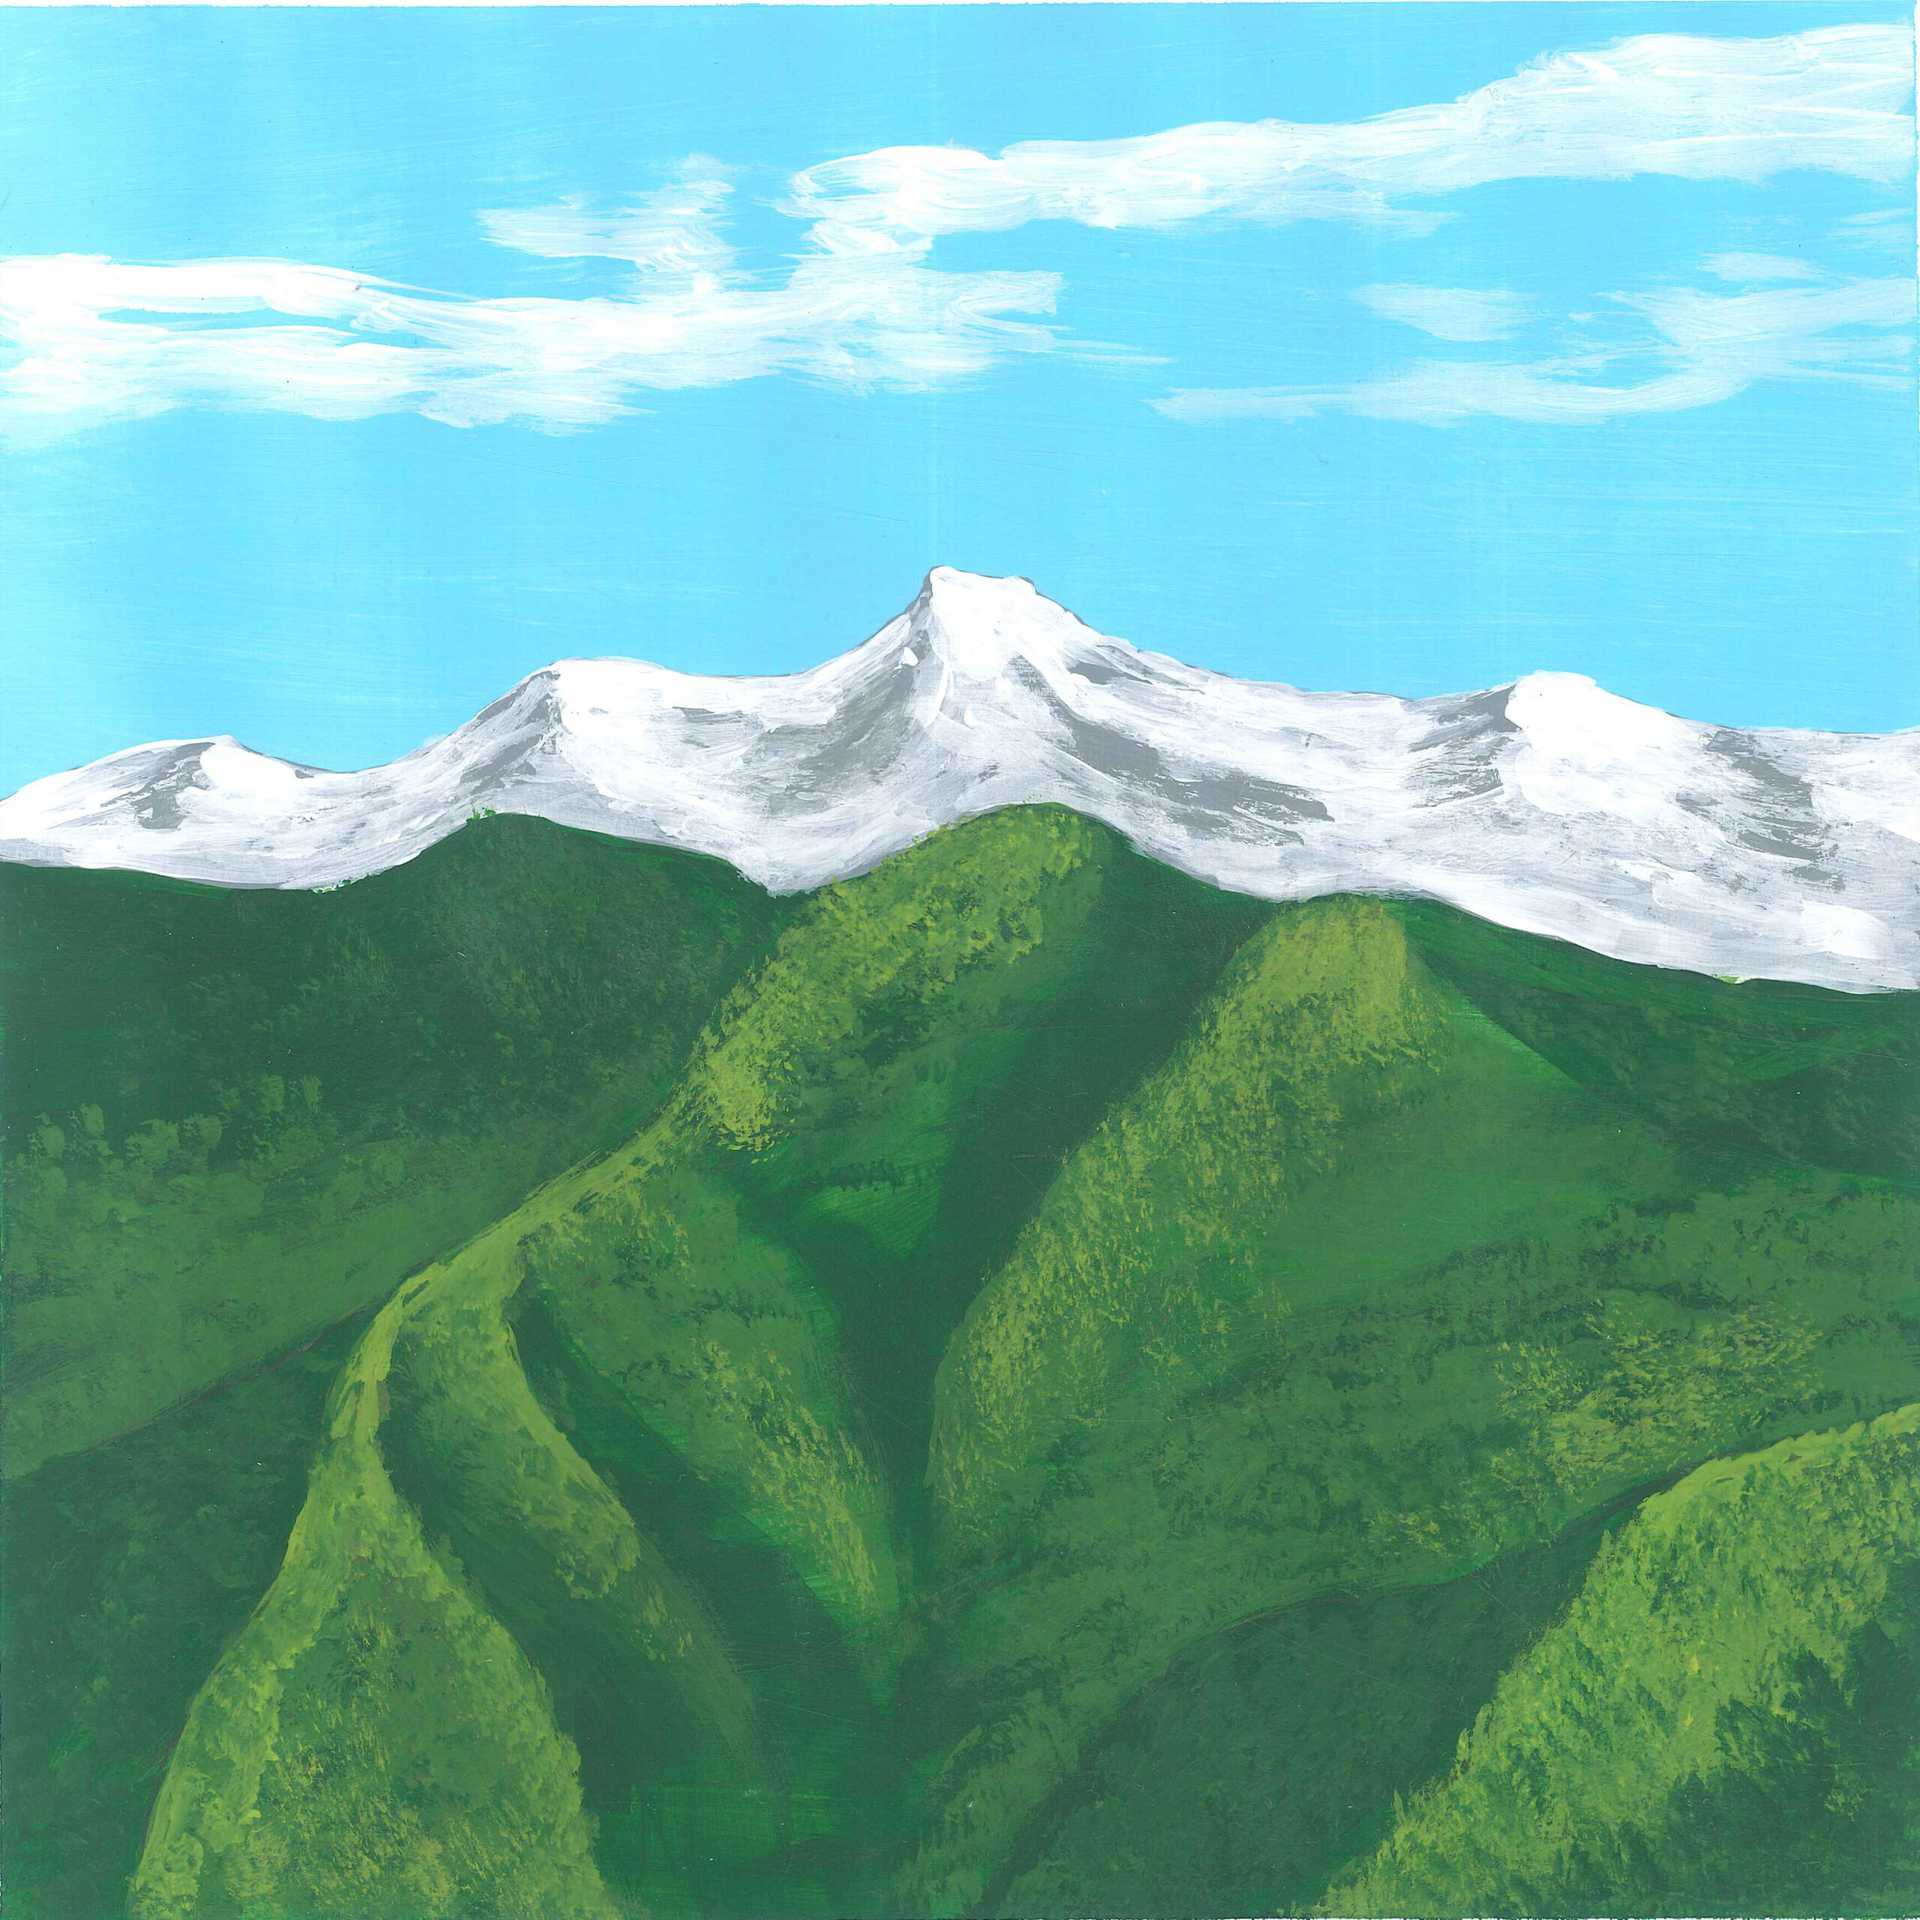 Dawn in Himalayas - nature landscape painting - earth.fm